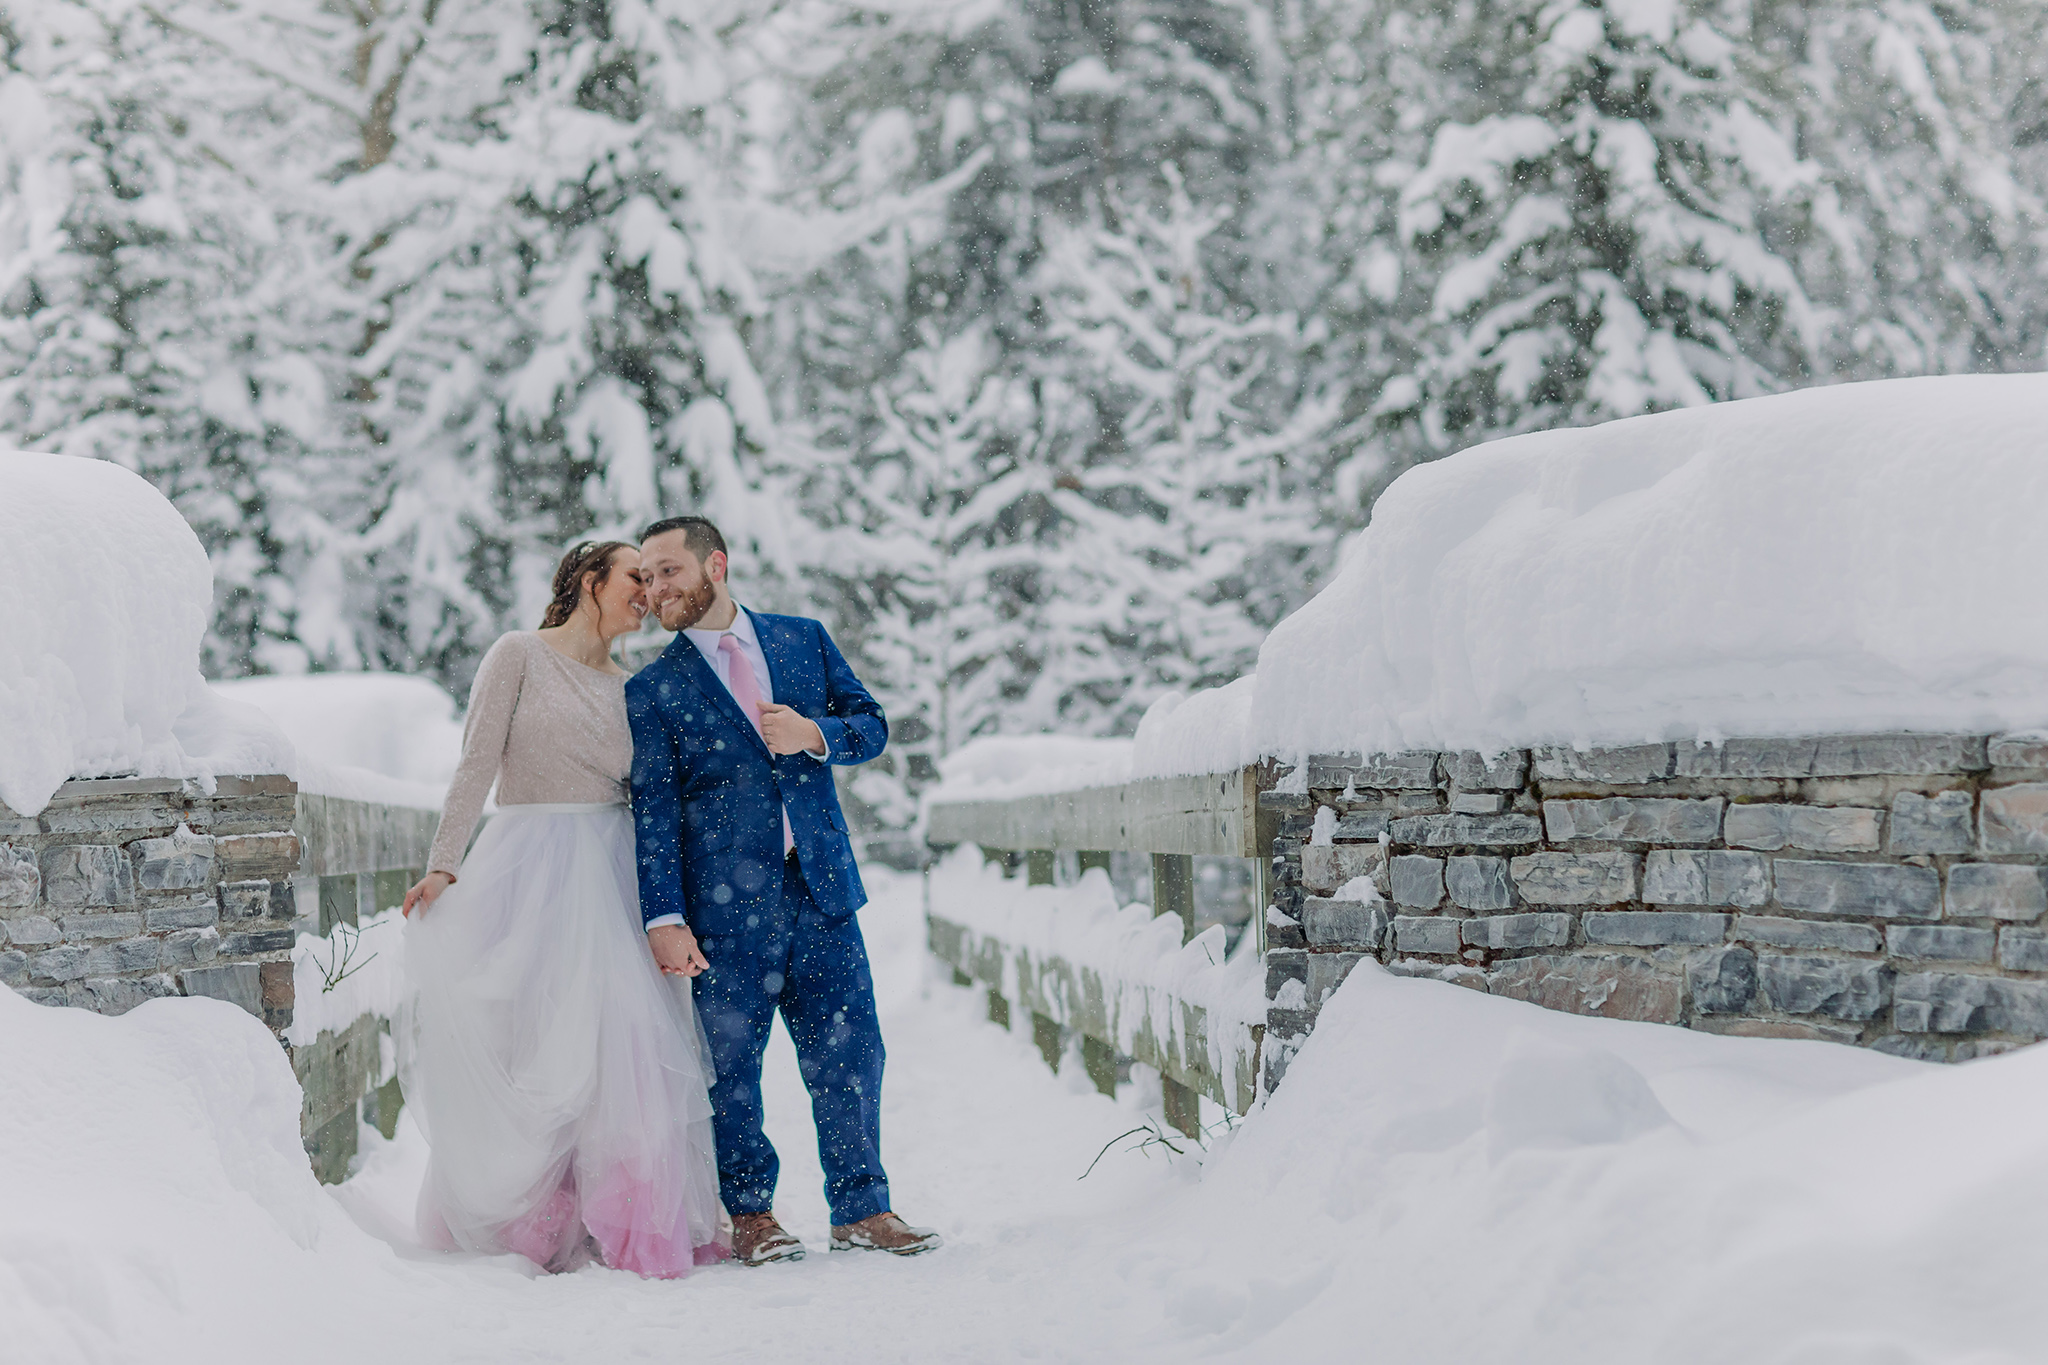 Post Hotel wedding portraits on the bridge over the Bow River on super snowy winter day. Bride in rainbow dress.